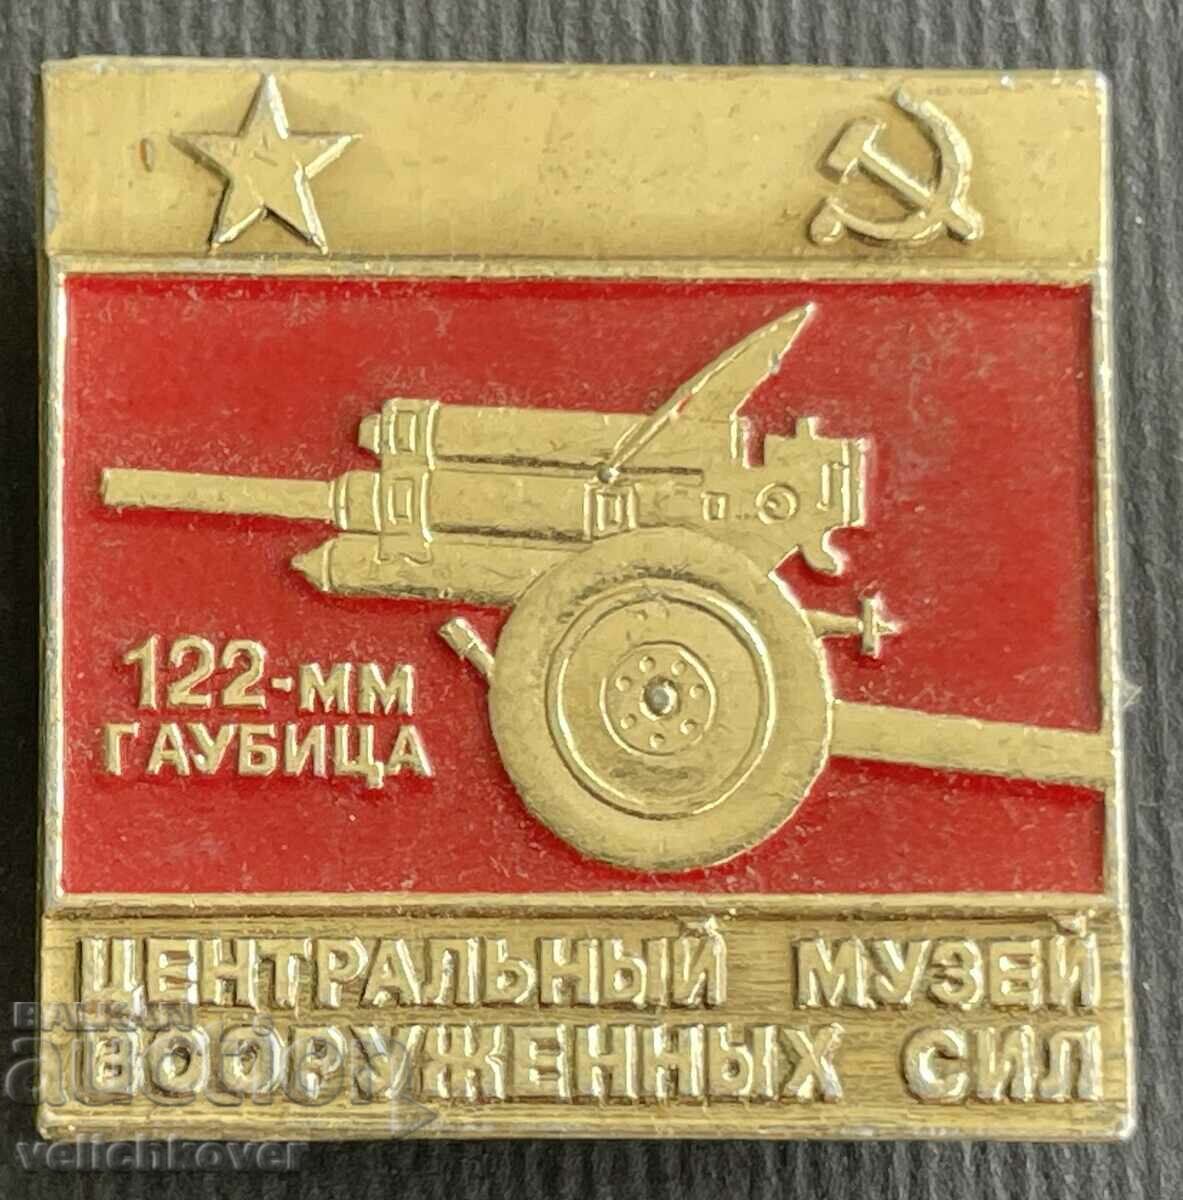 36257 USSR badge Museum of the Armed Forces howitzer 122mm.